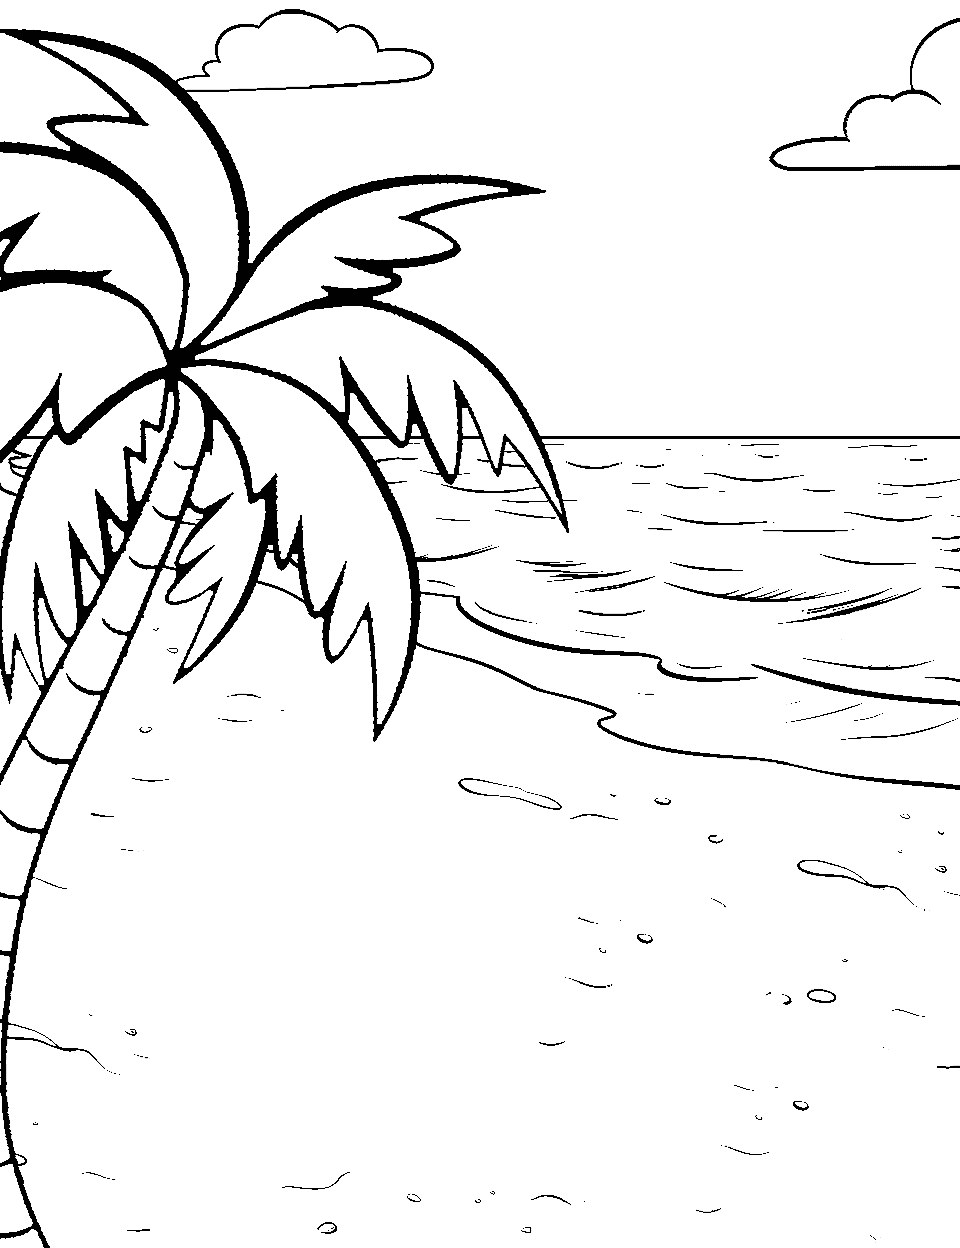 Ocean Oasis Coloring Page - A beach scene with waves and a palm tree.